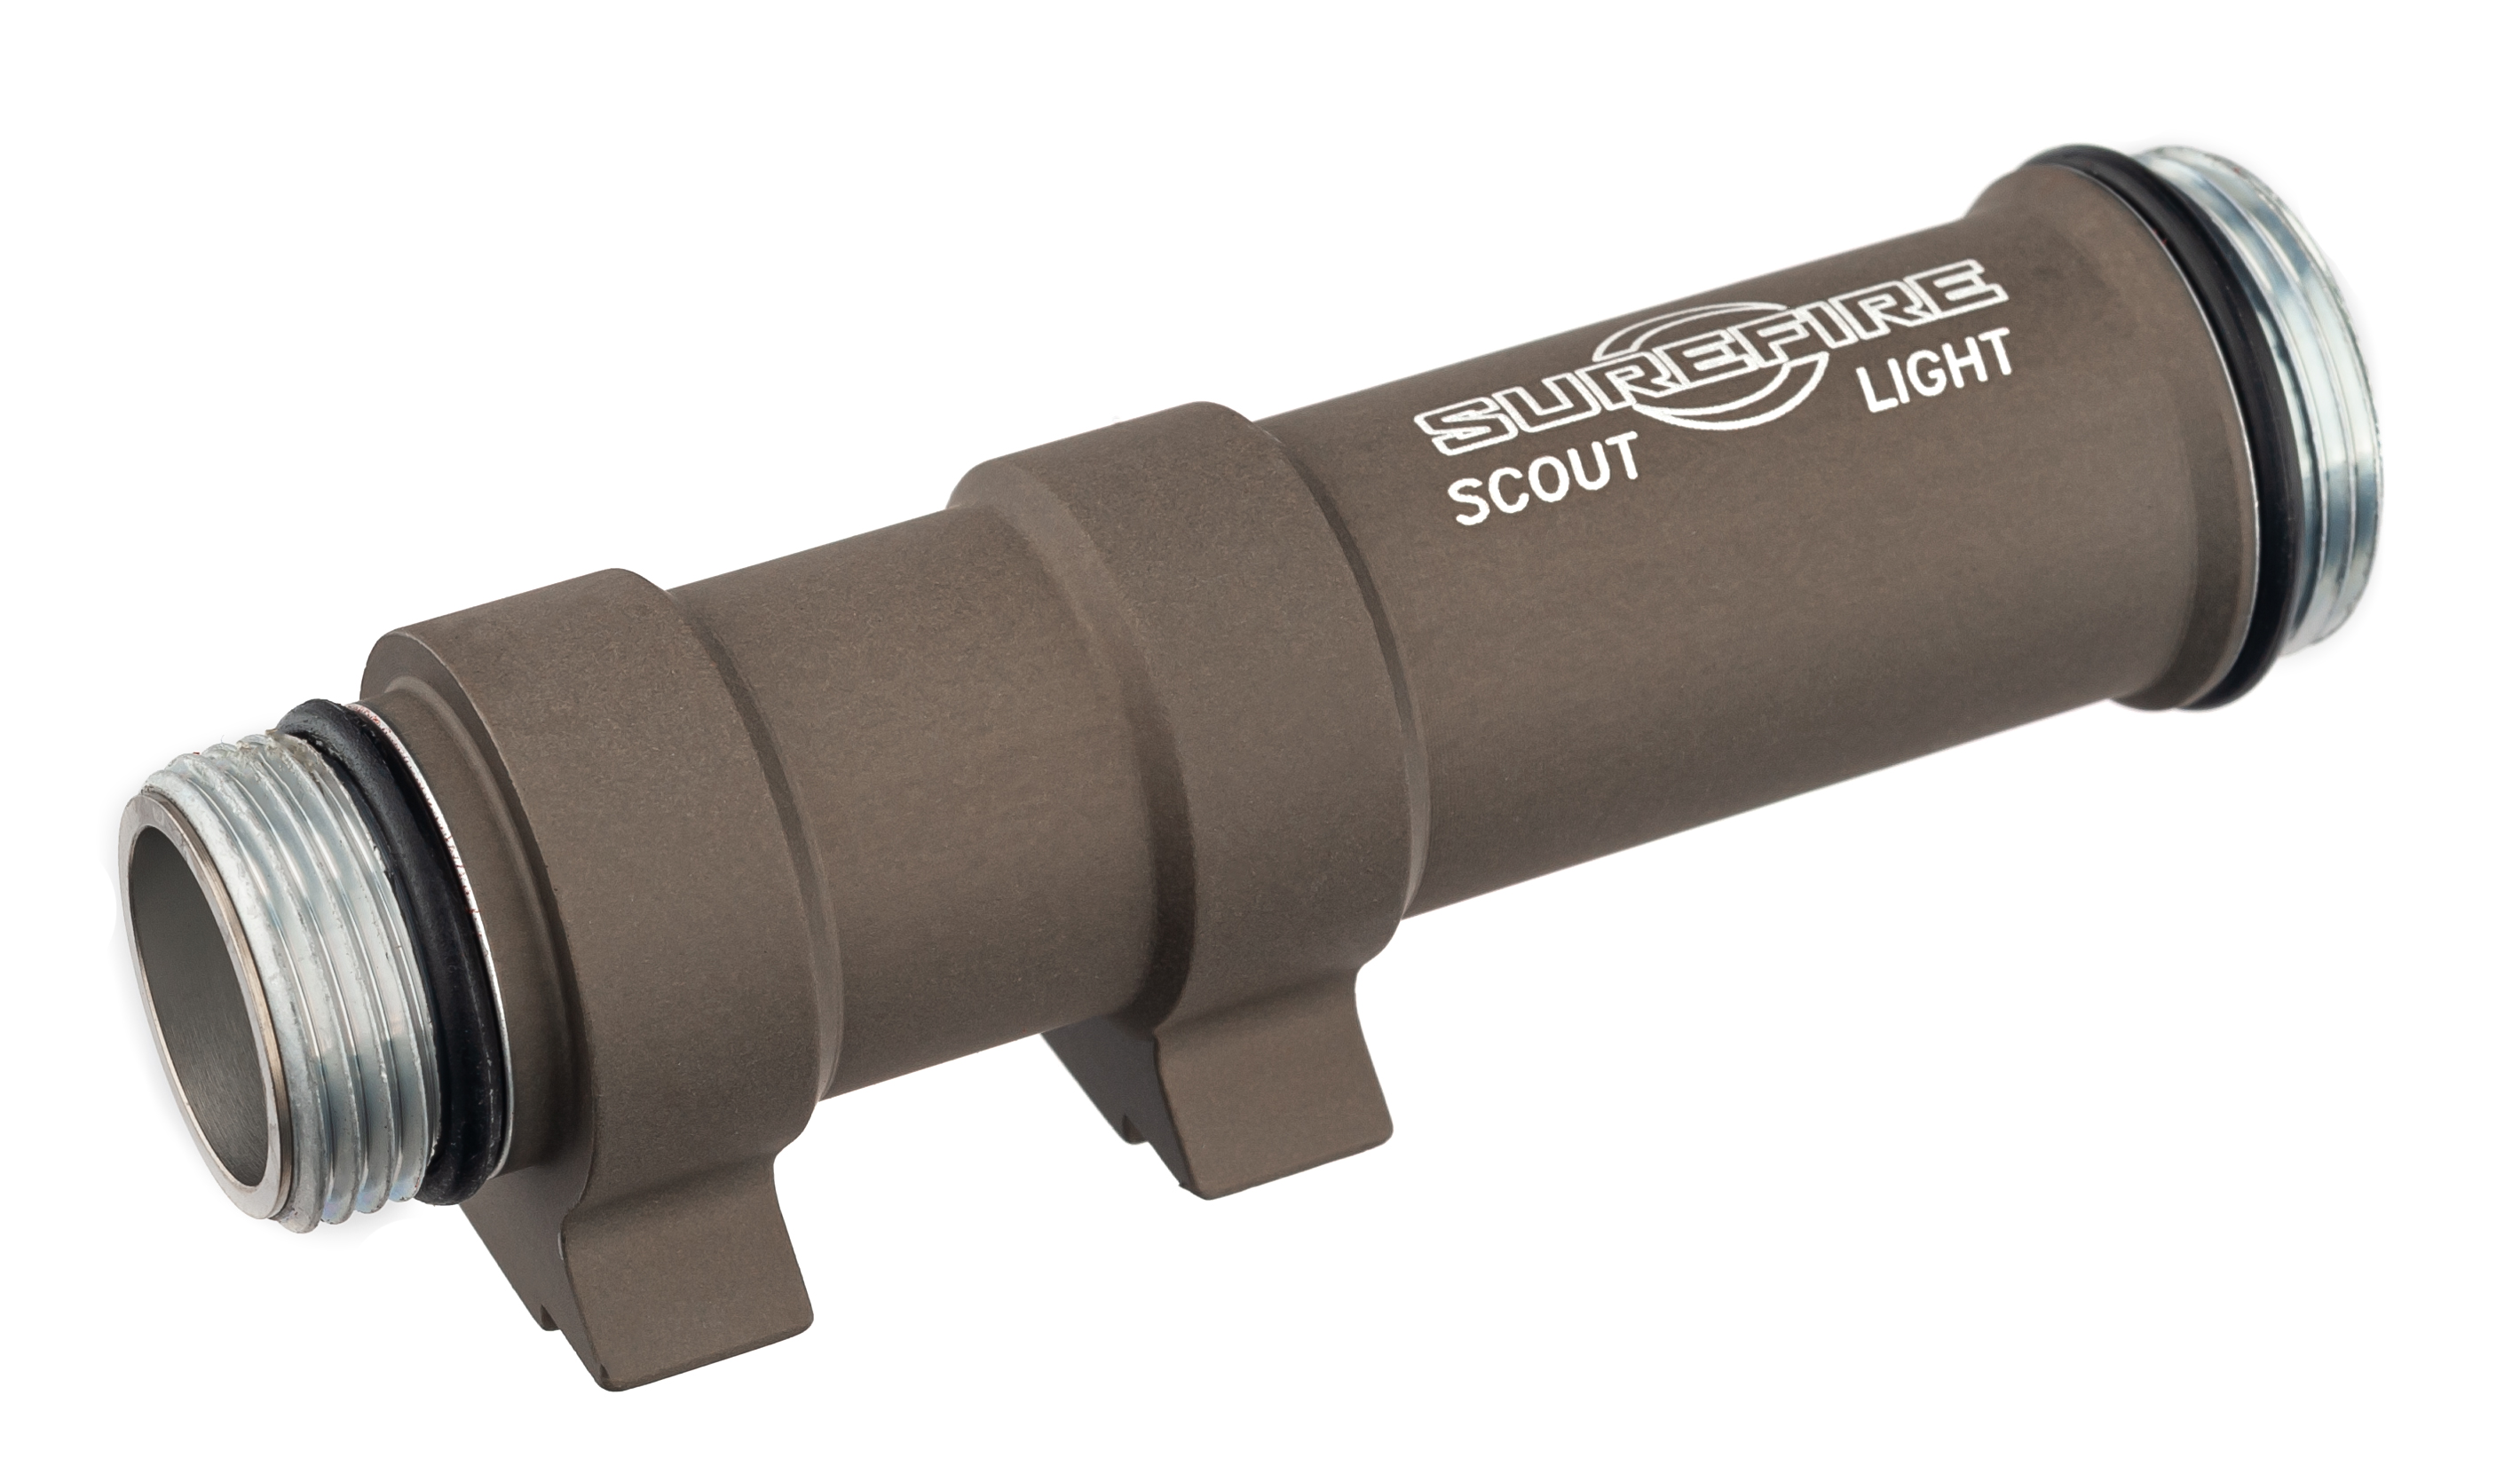 SureFire M600 Series Scout Lights Body Assembly | Up to 13% Off 4